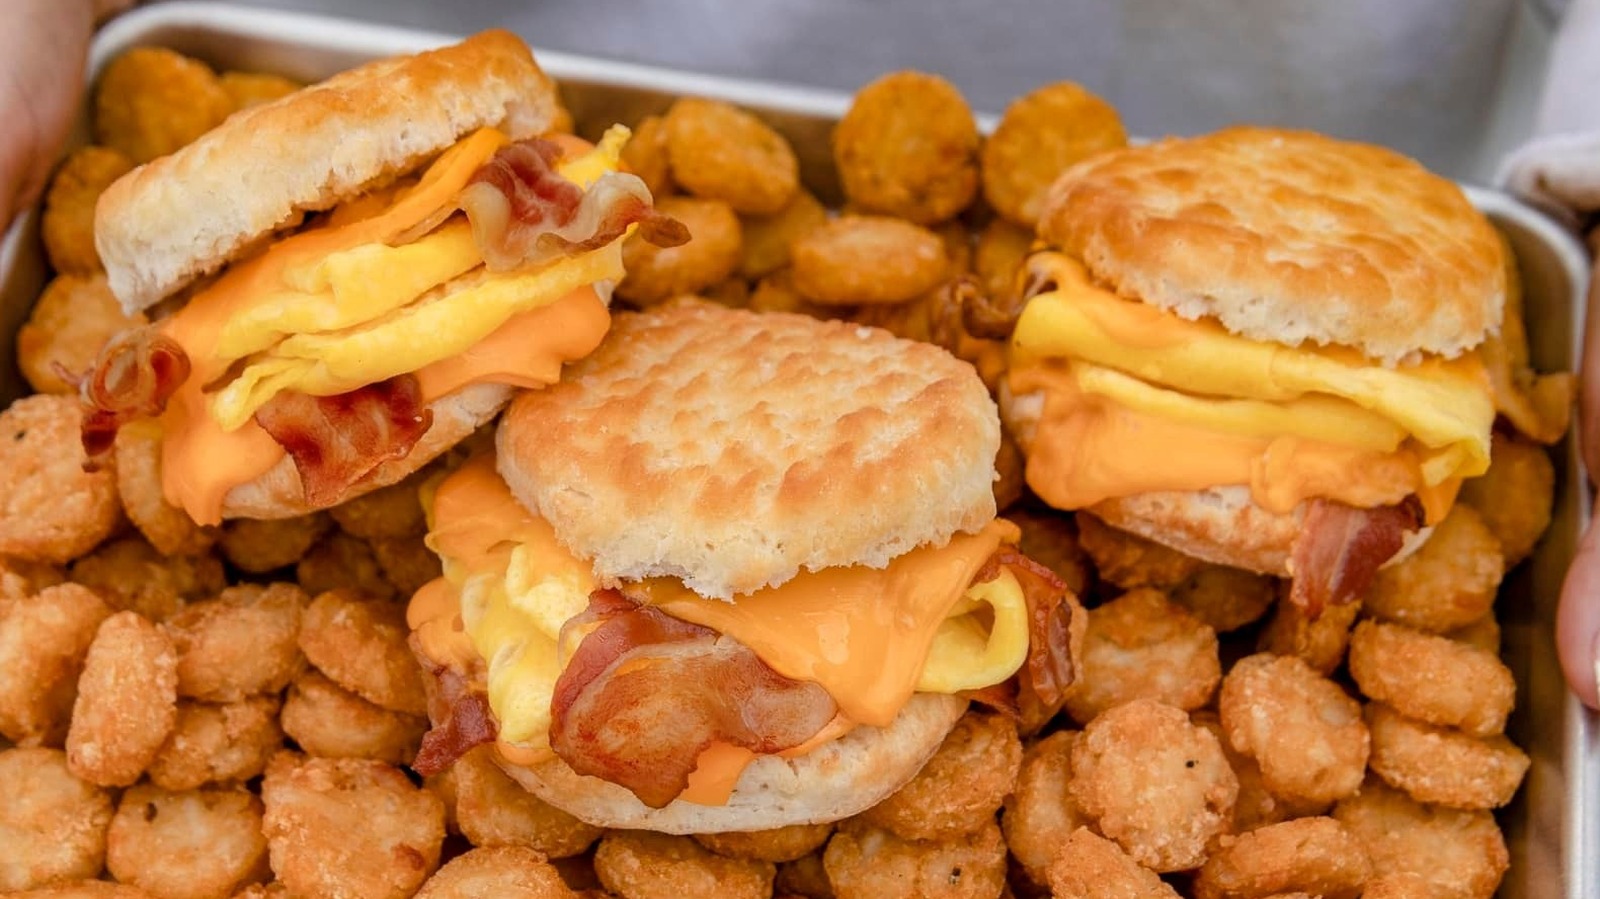 Hardee's What Only True Fans Know About The Chain's Breakfast Menu